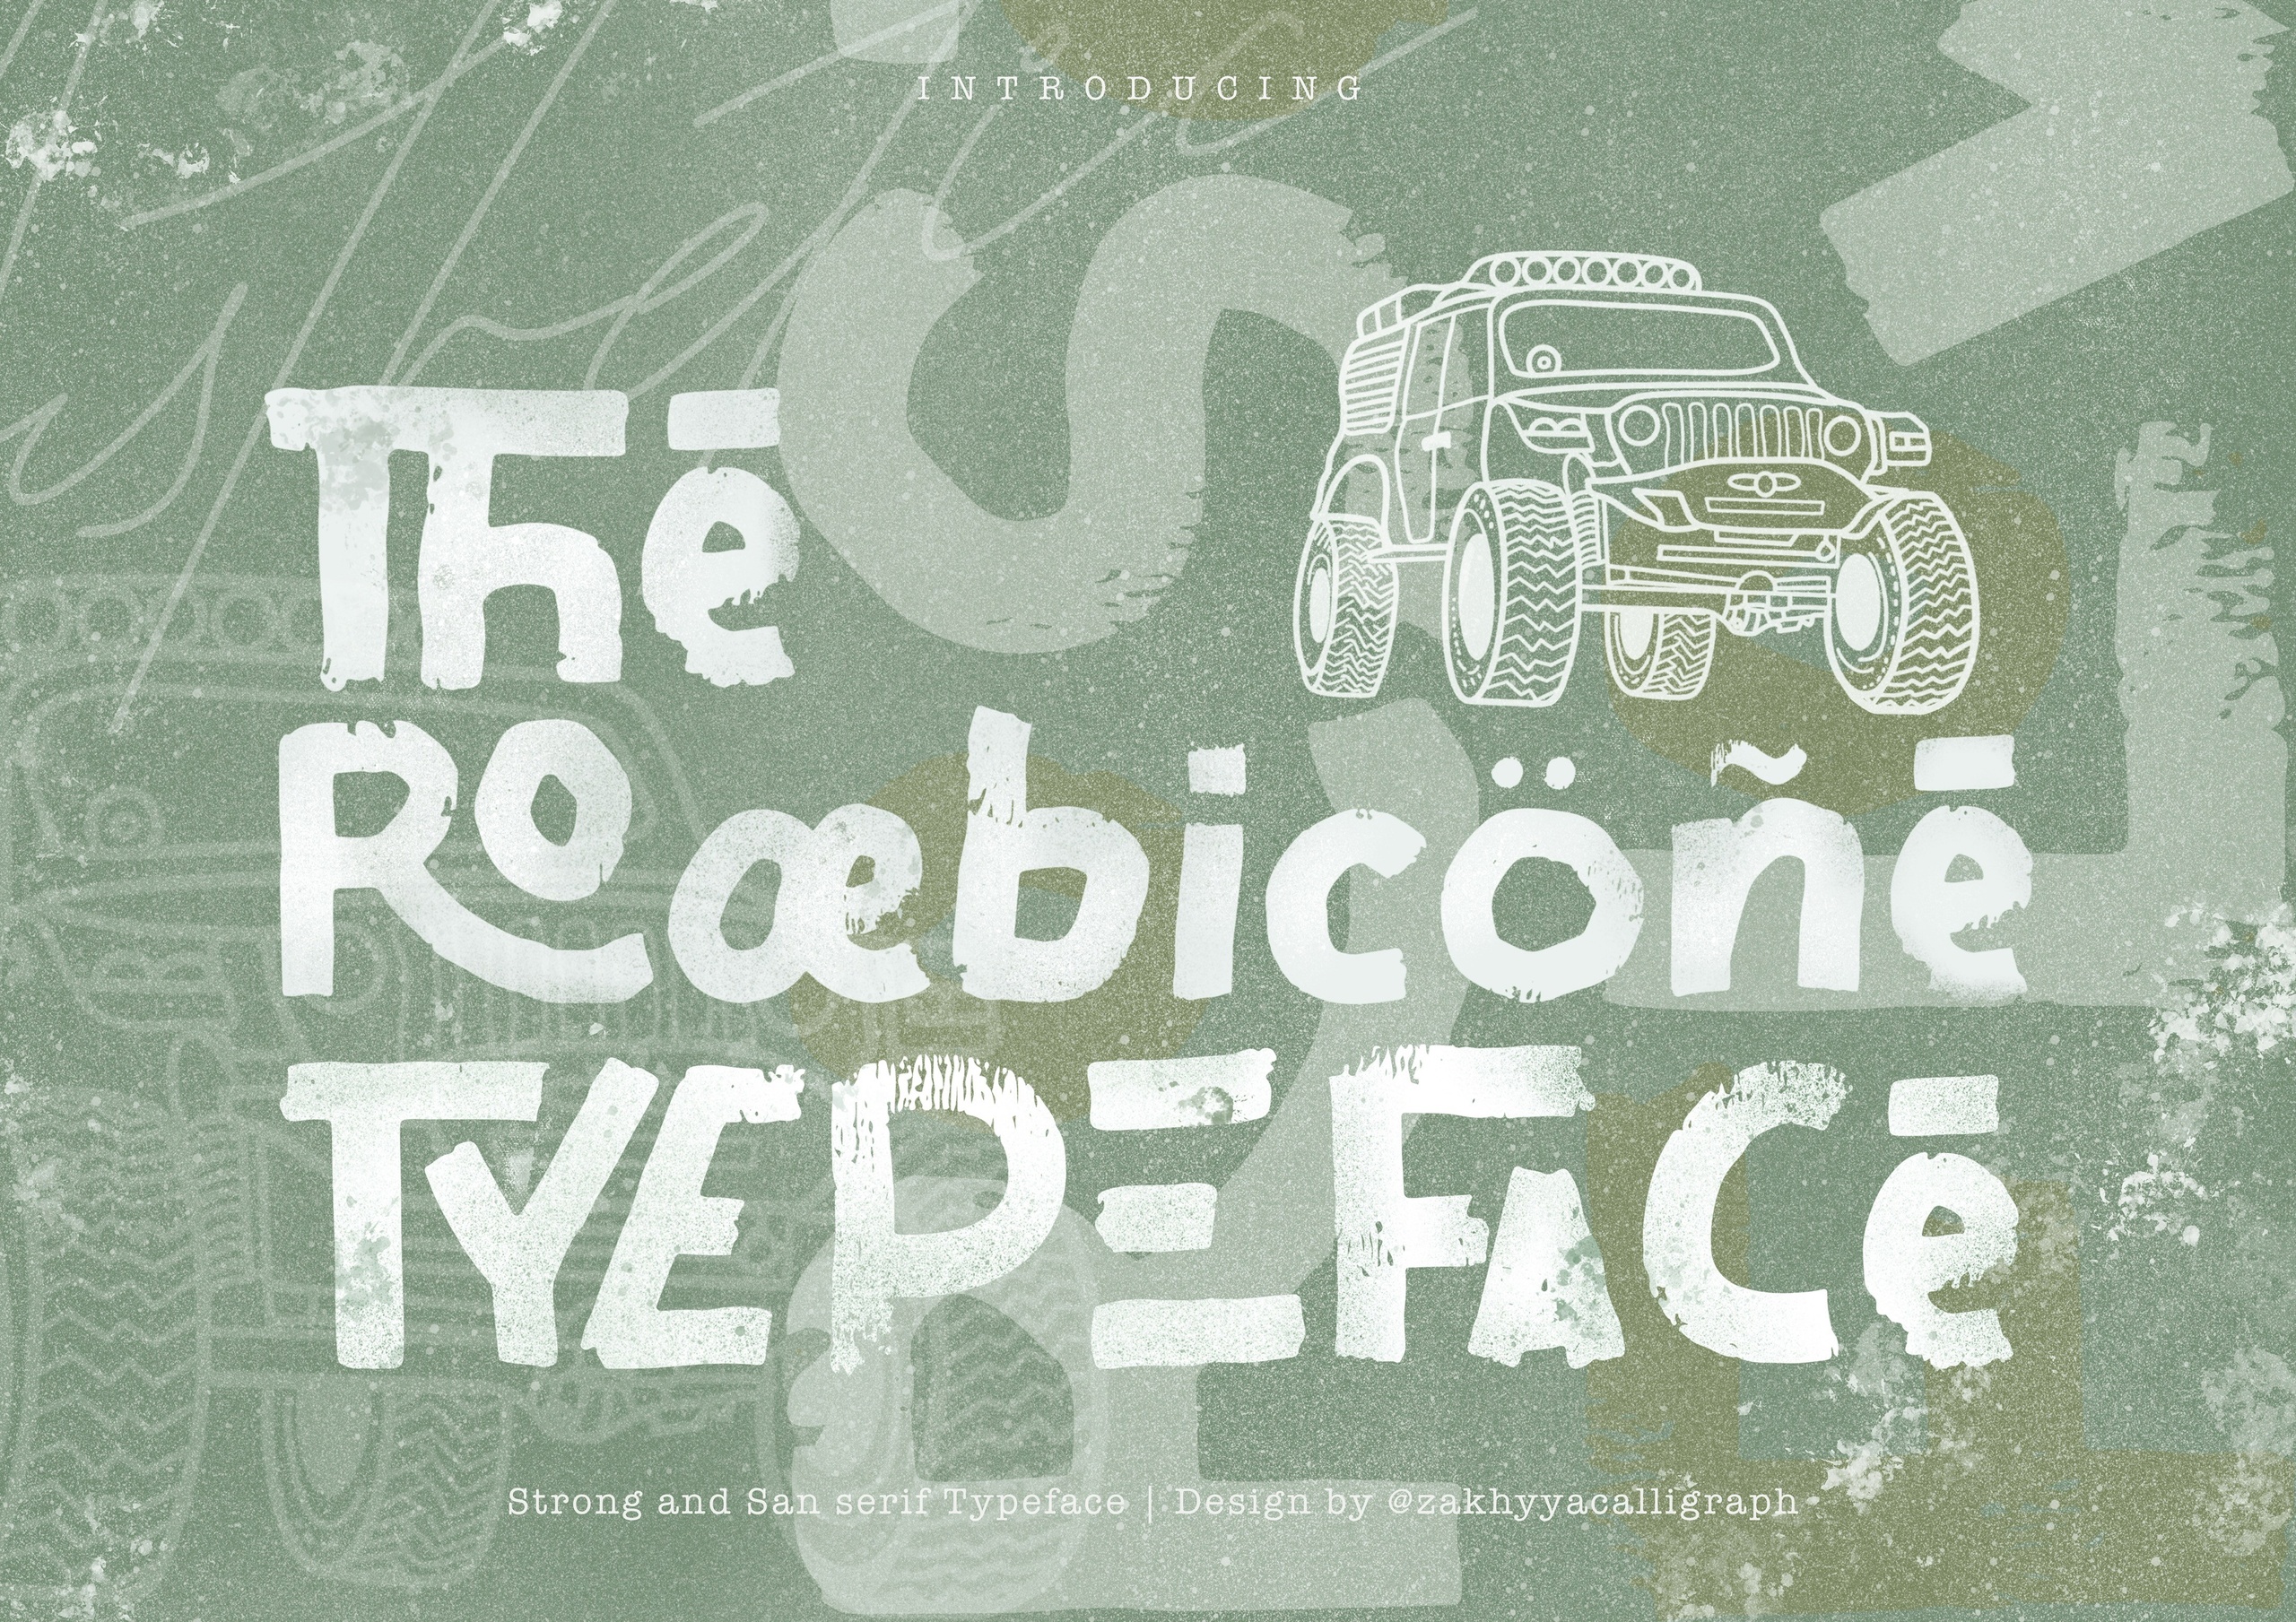 The Rooebicone Font